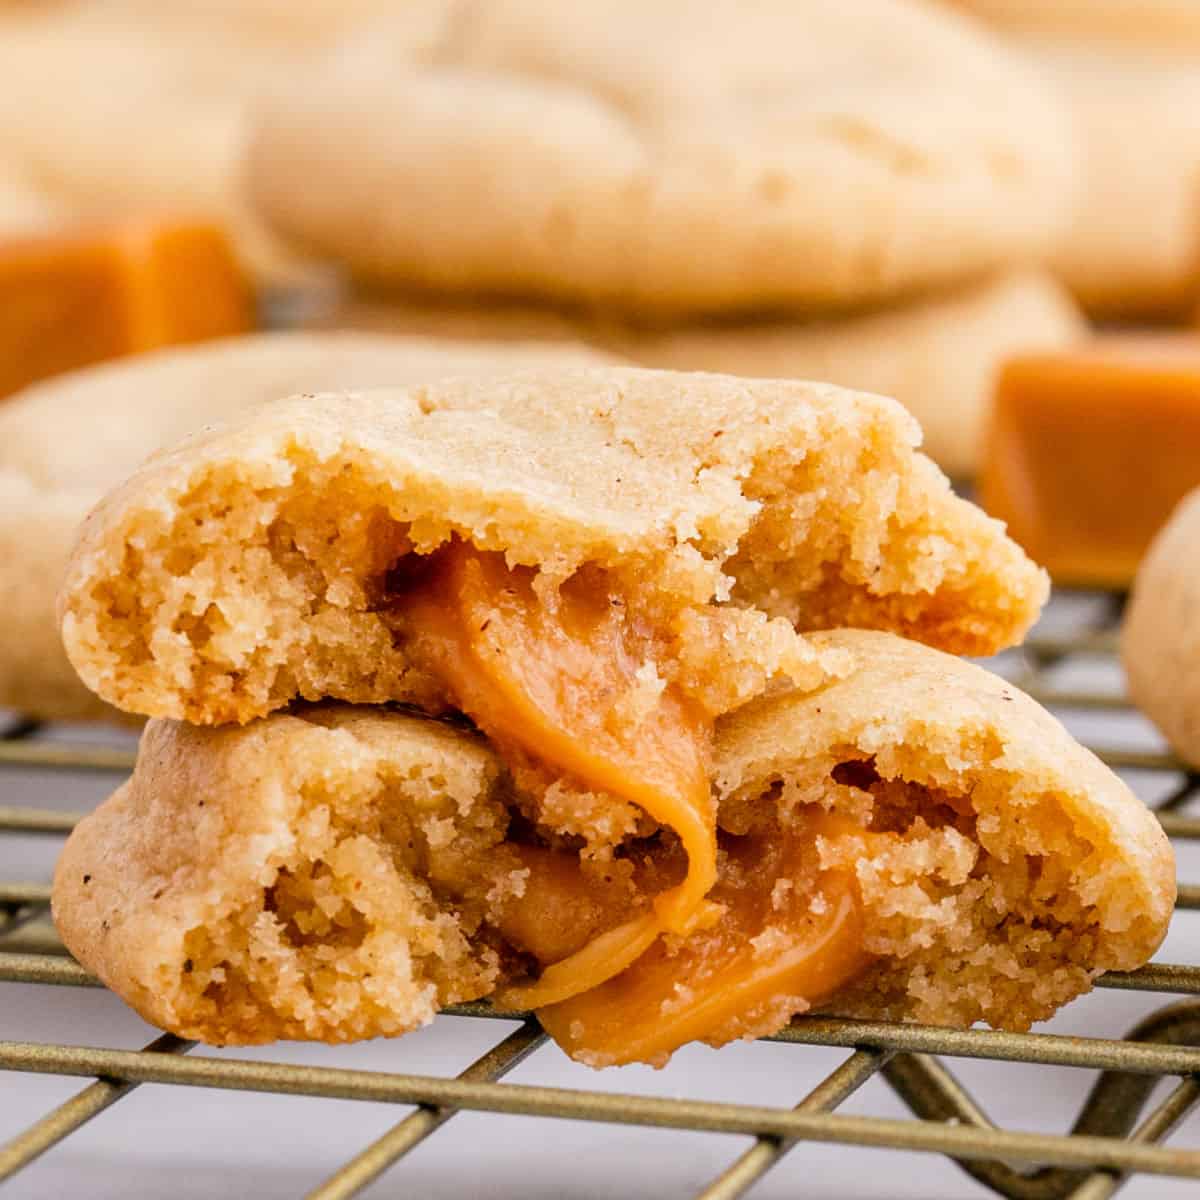 https://realhousemoms.com/wp-content/uploads/Apple-Cider-Cookies-with-Caramel-Filling-RECIPE-CARD.jpg